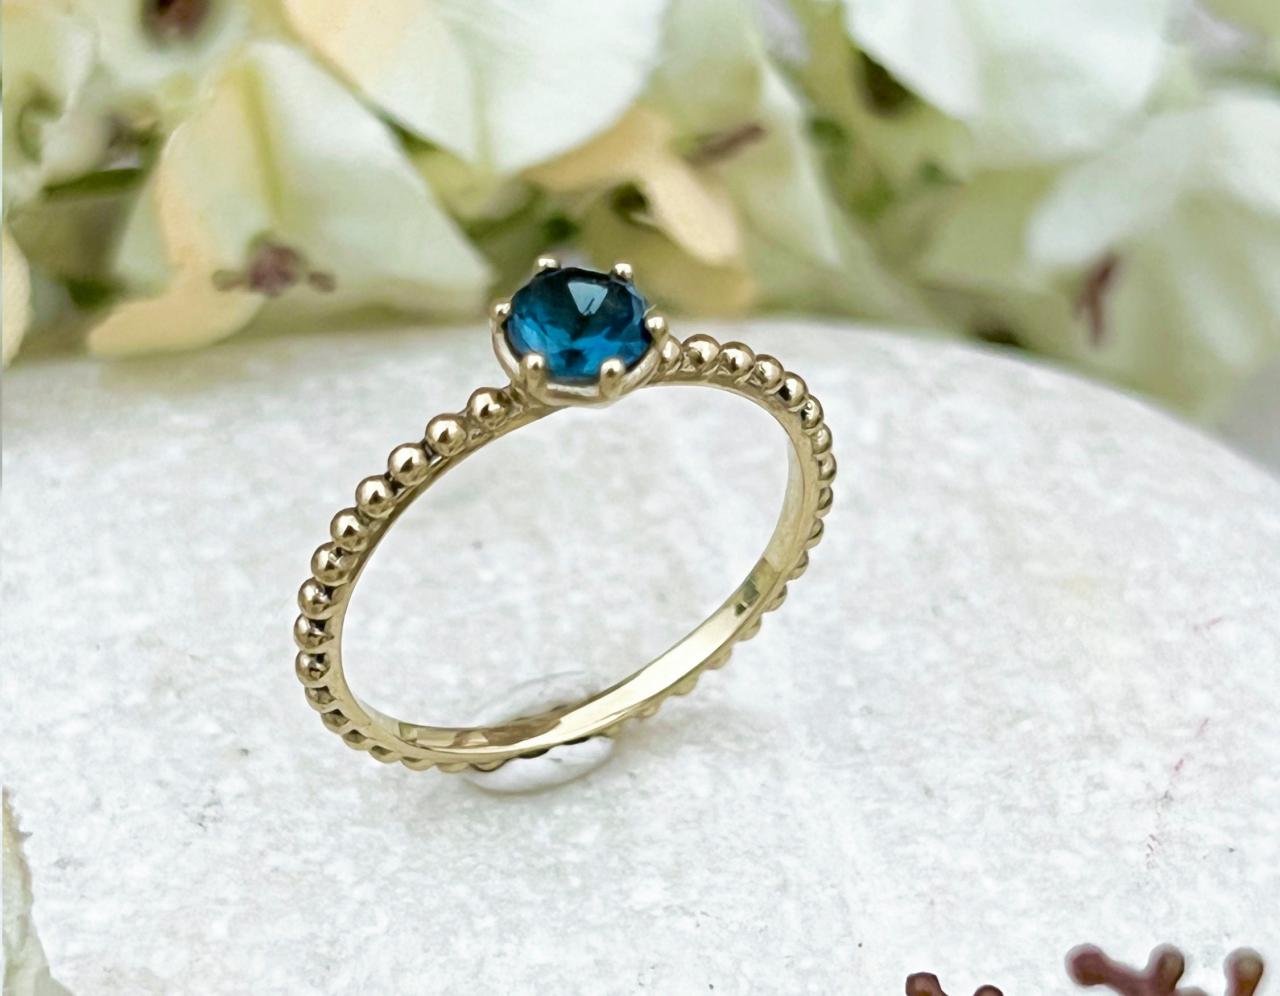 London Blue Topaz Gold Statement Solitaire Ring, Gemstone Dainty Engagement Ring With Round Cut Topaz, 18k Stackable Ring For Bride Gift